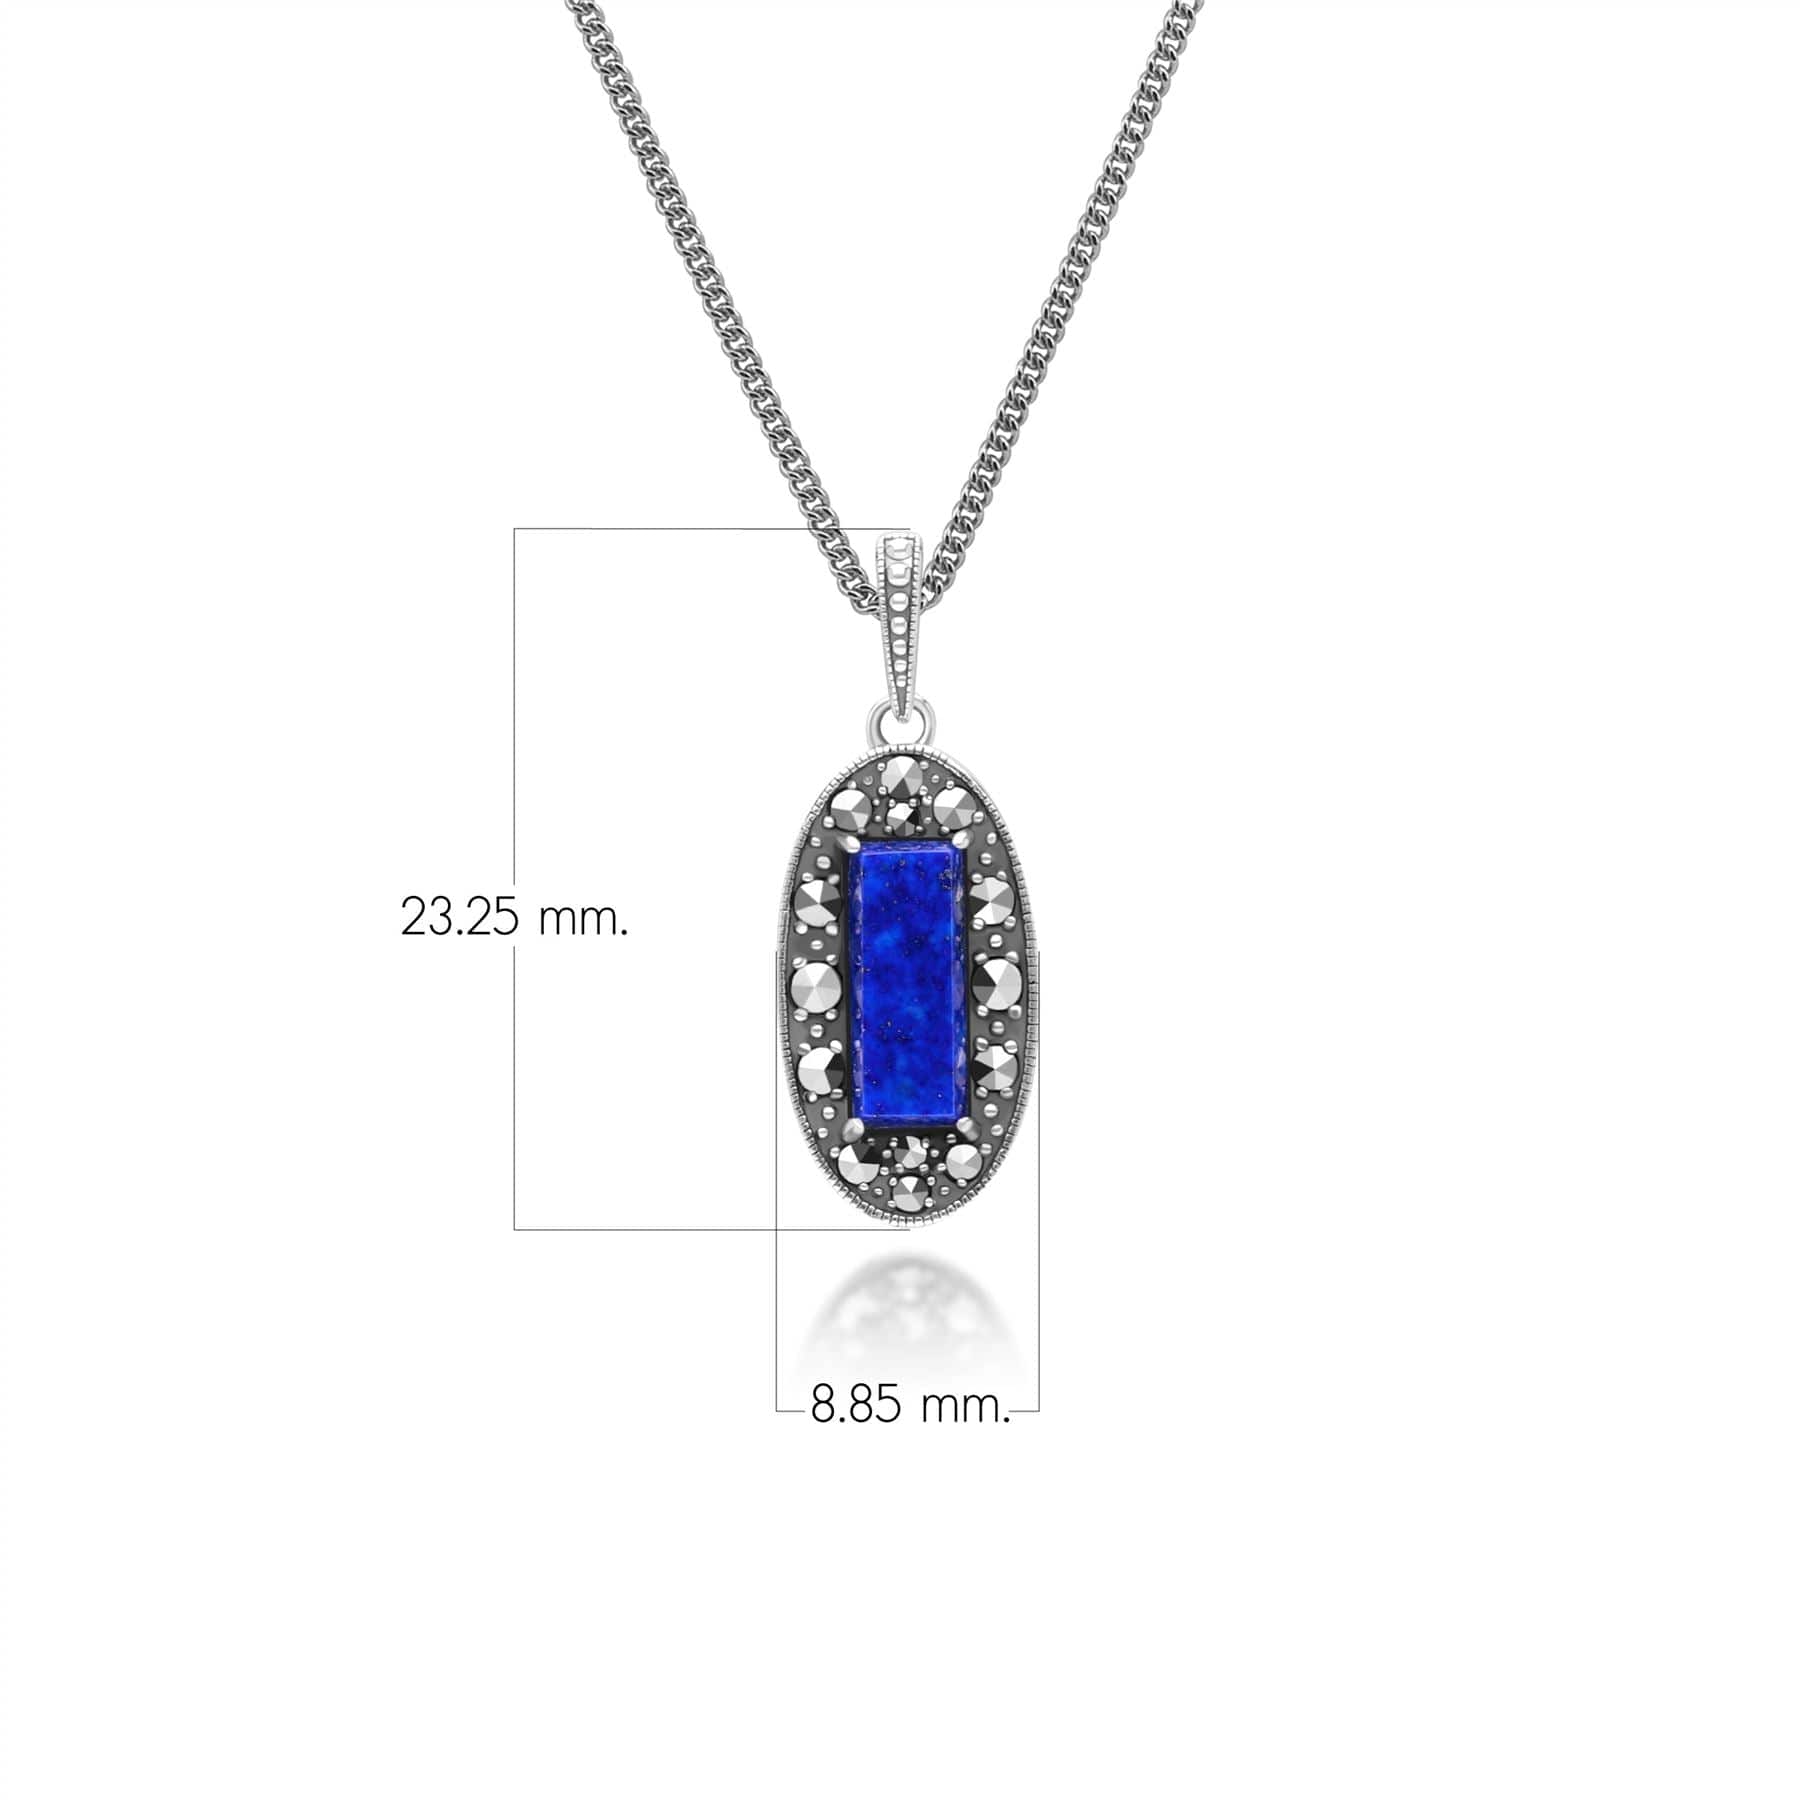 Art Deco Style Oval Lapis Lazuli and Marcasite Pendant Necklace in Sterling Silver 214P334301925 Dimensions